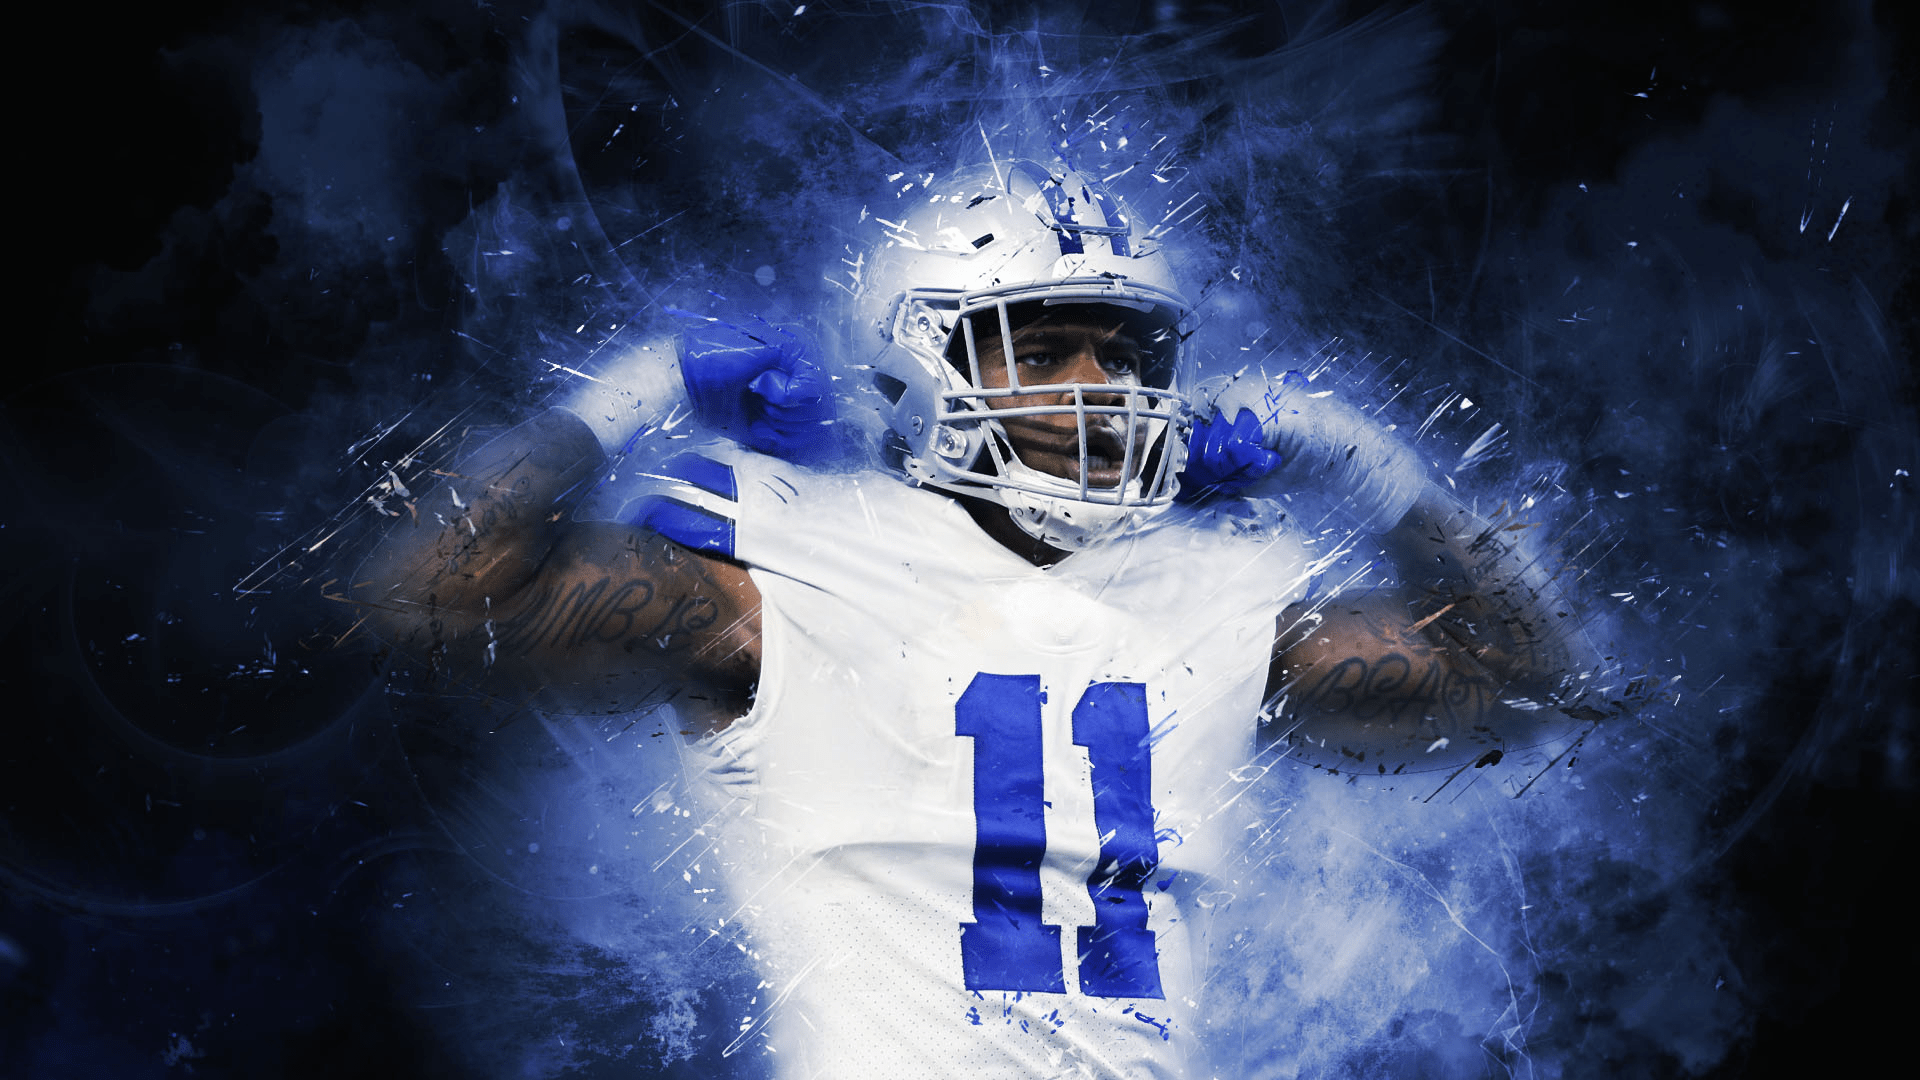 Dallas Cowboys  Micah Parsons for your WallpaperWednesday refresh   DallasCowboys  TheLionIsAlwaysHungry  Facebook